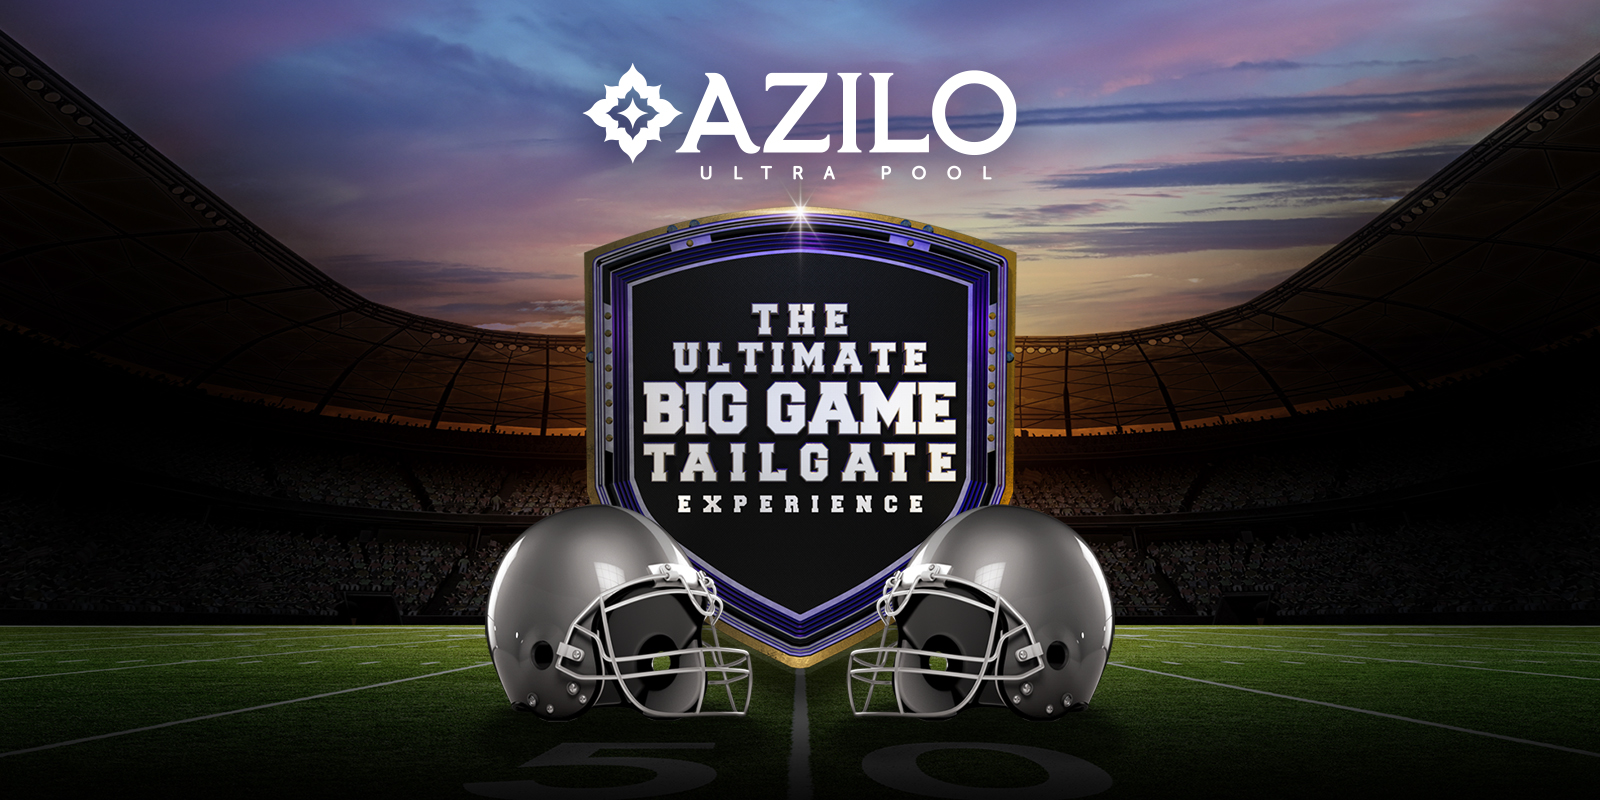 The Ultimate Big Game Tailgate Experience copy against a football stadium with two football helmets